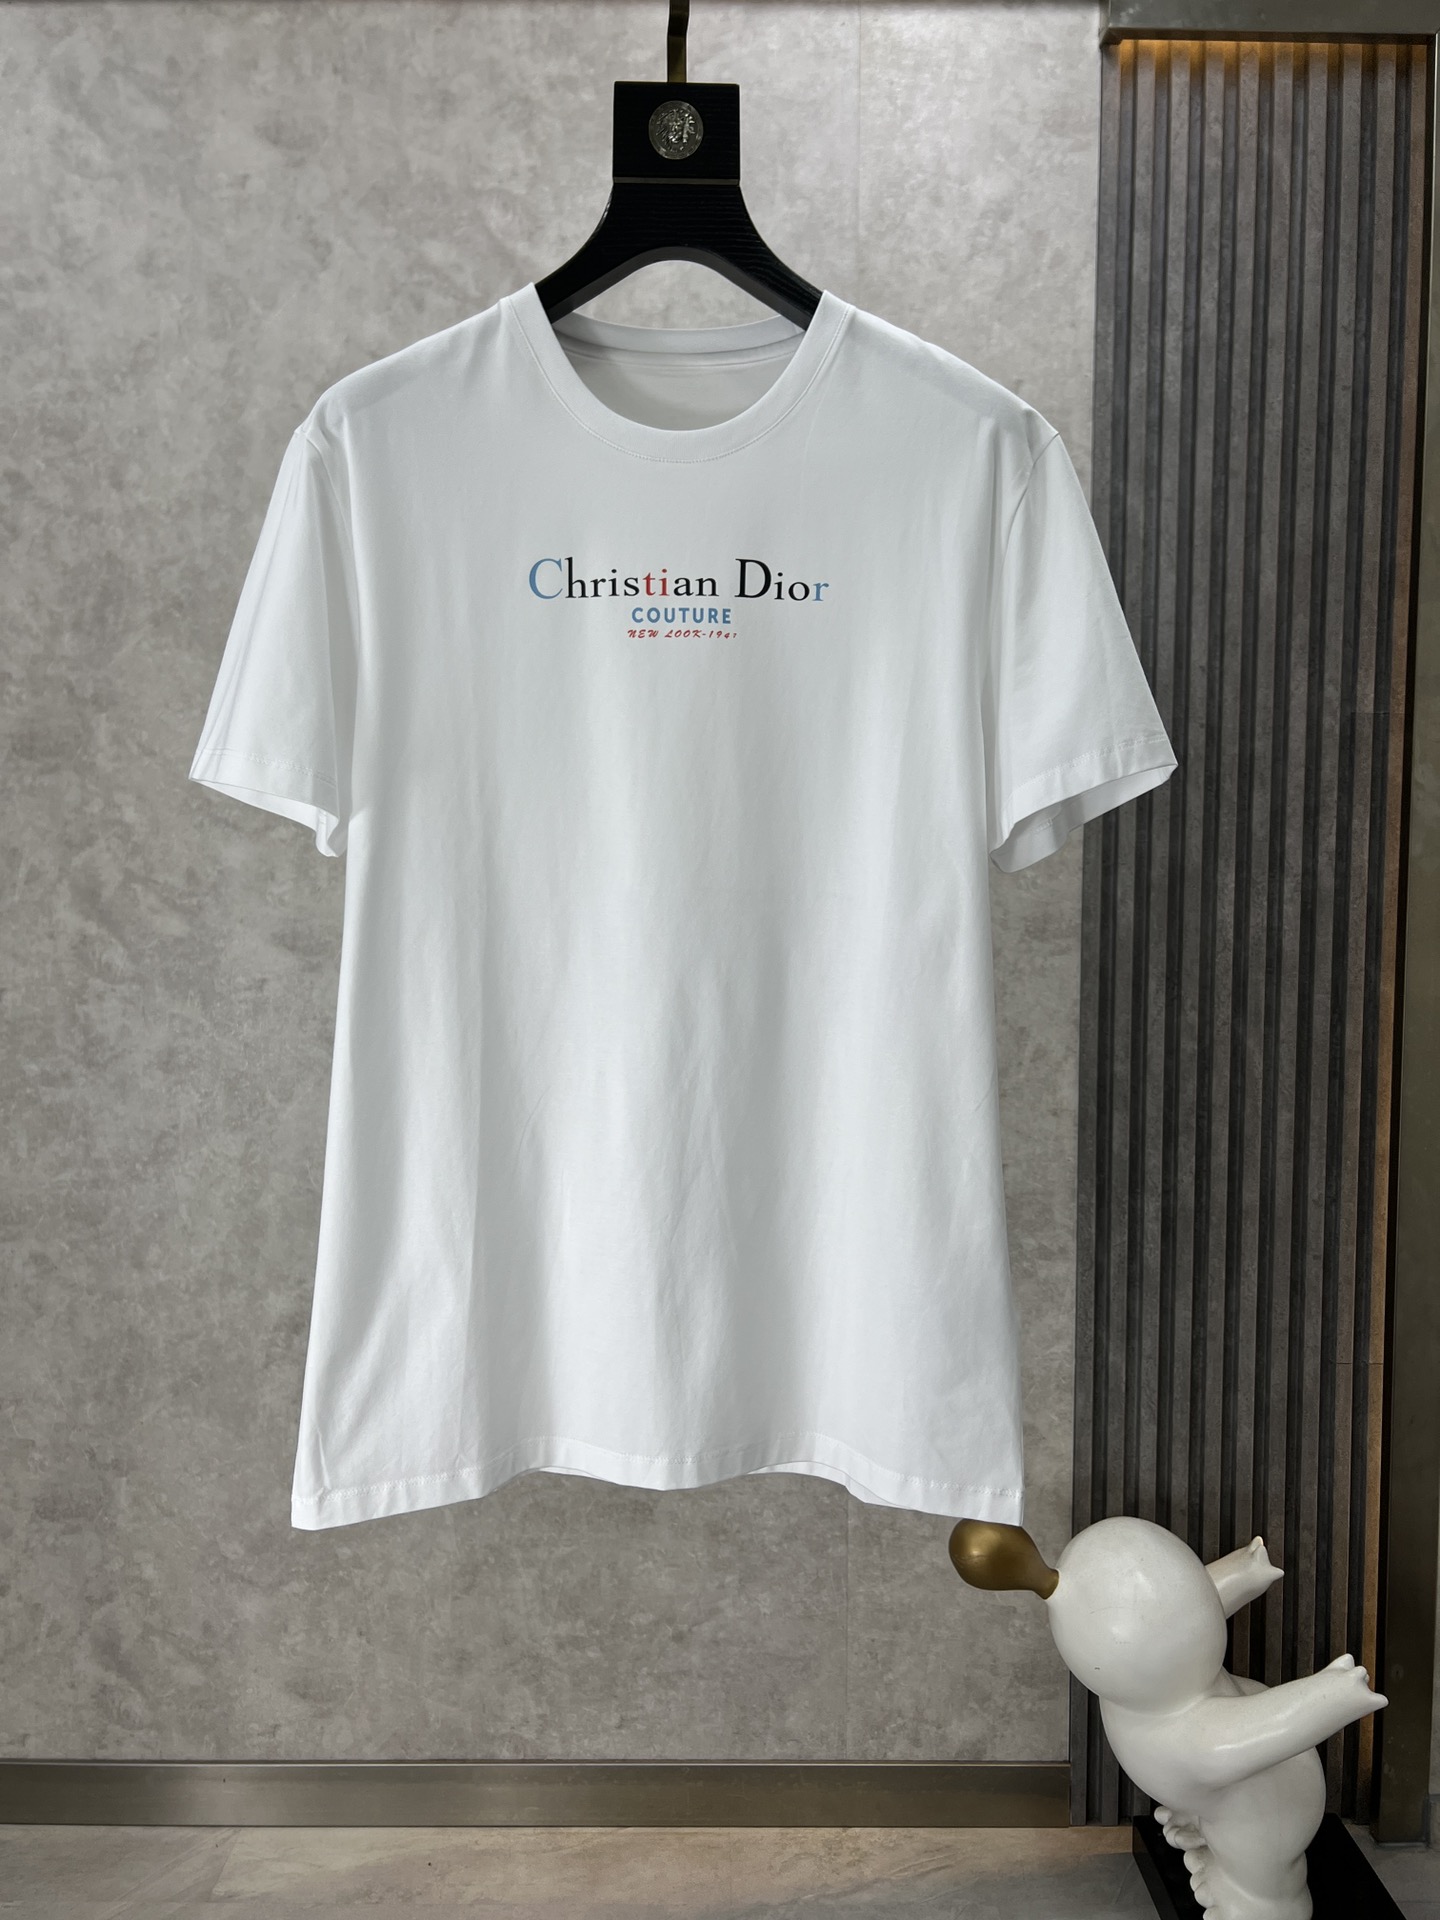 Dior Wholesale
 Clothing T-Shirt Sell High Quality
 Cotton Stretch Fashion Short Sleeve